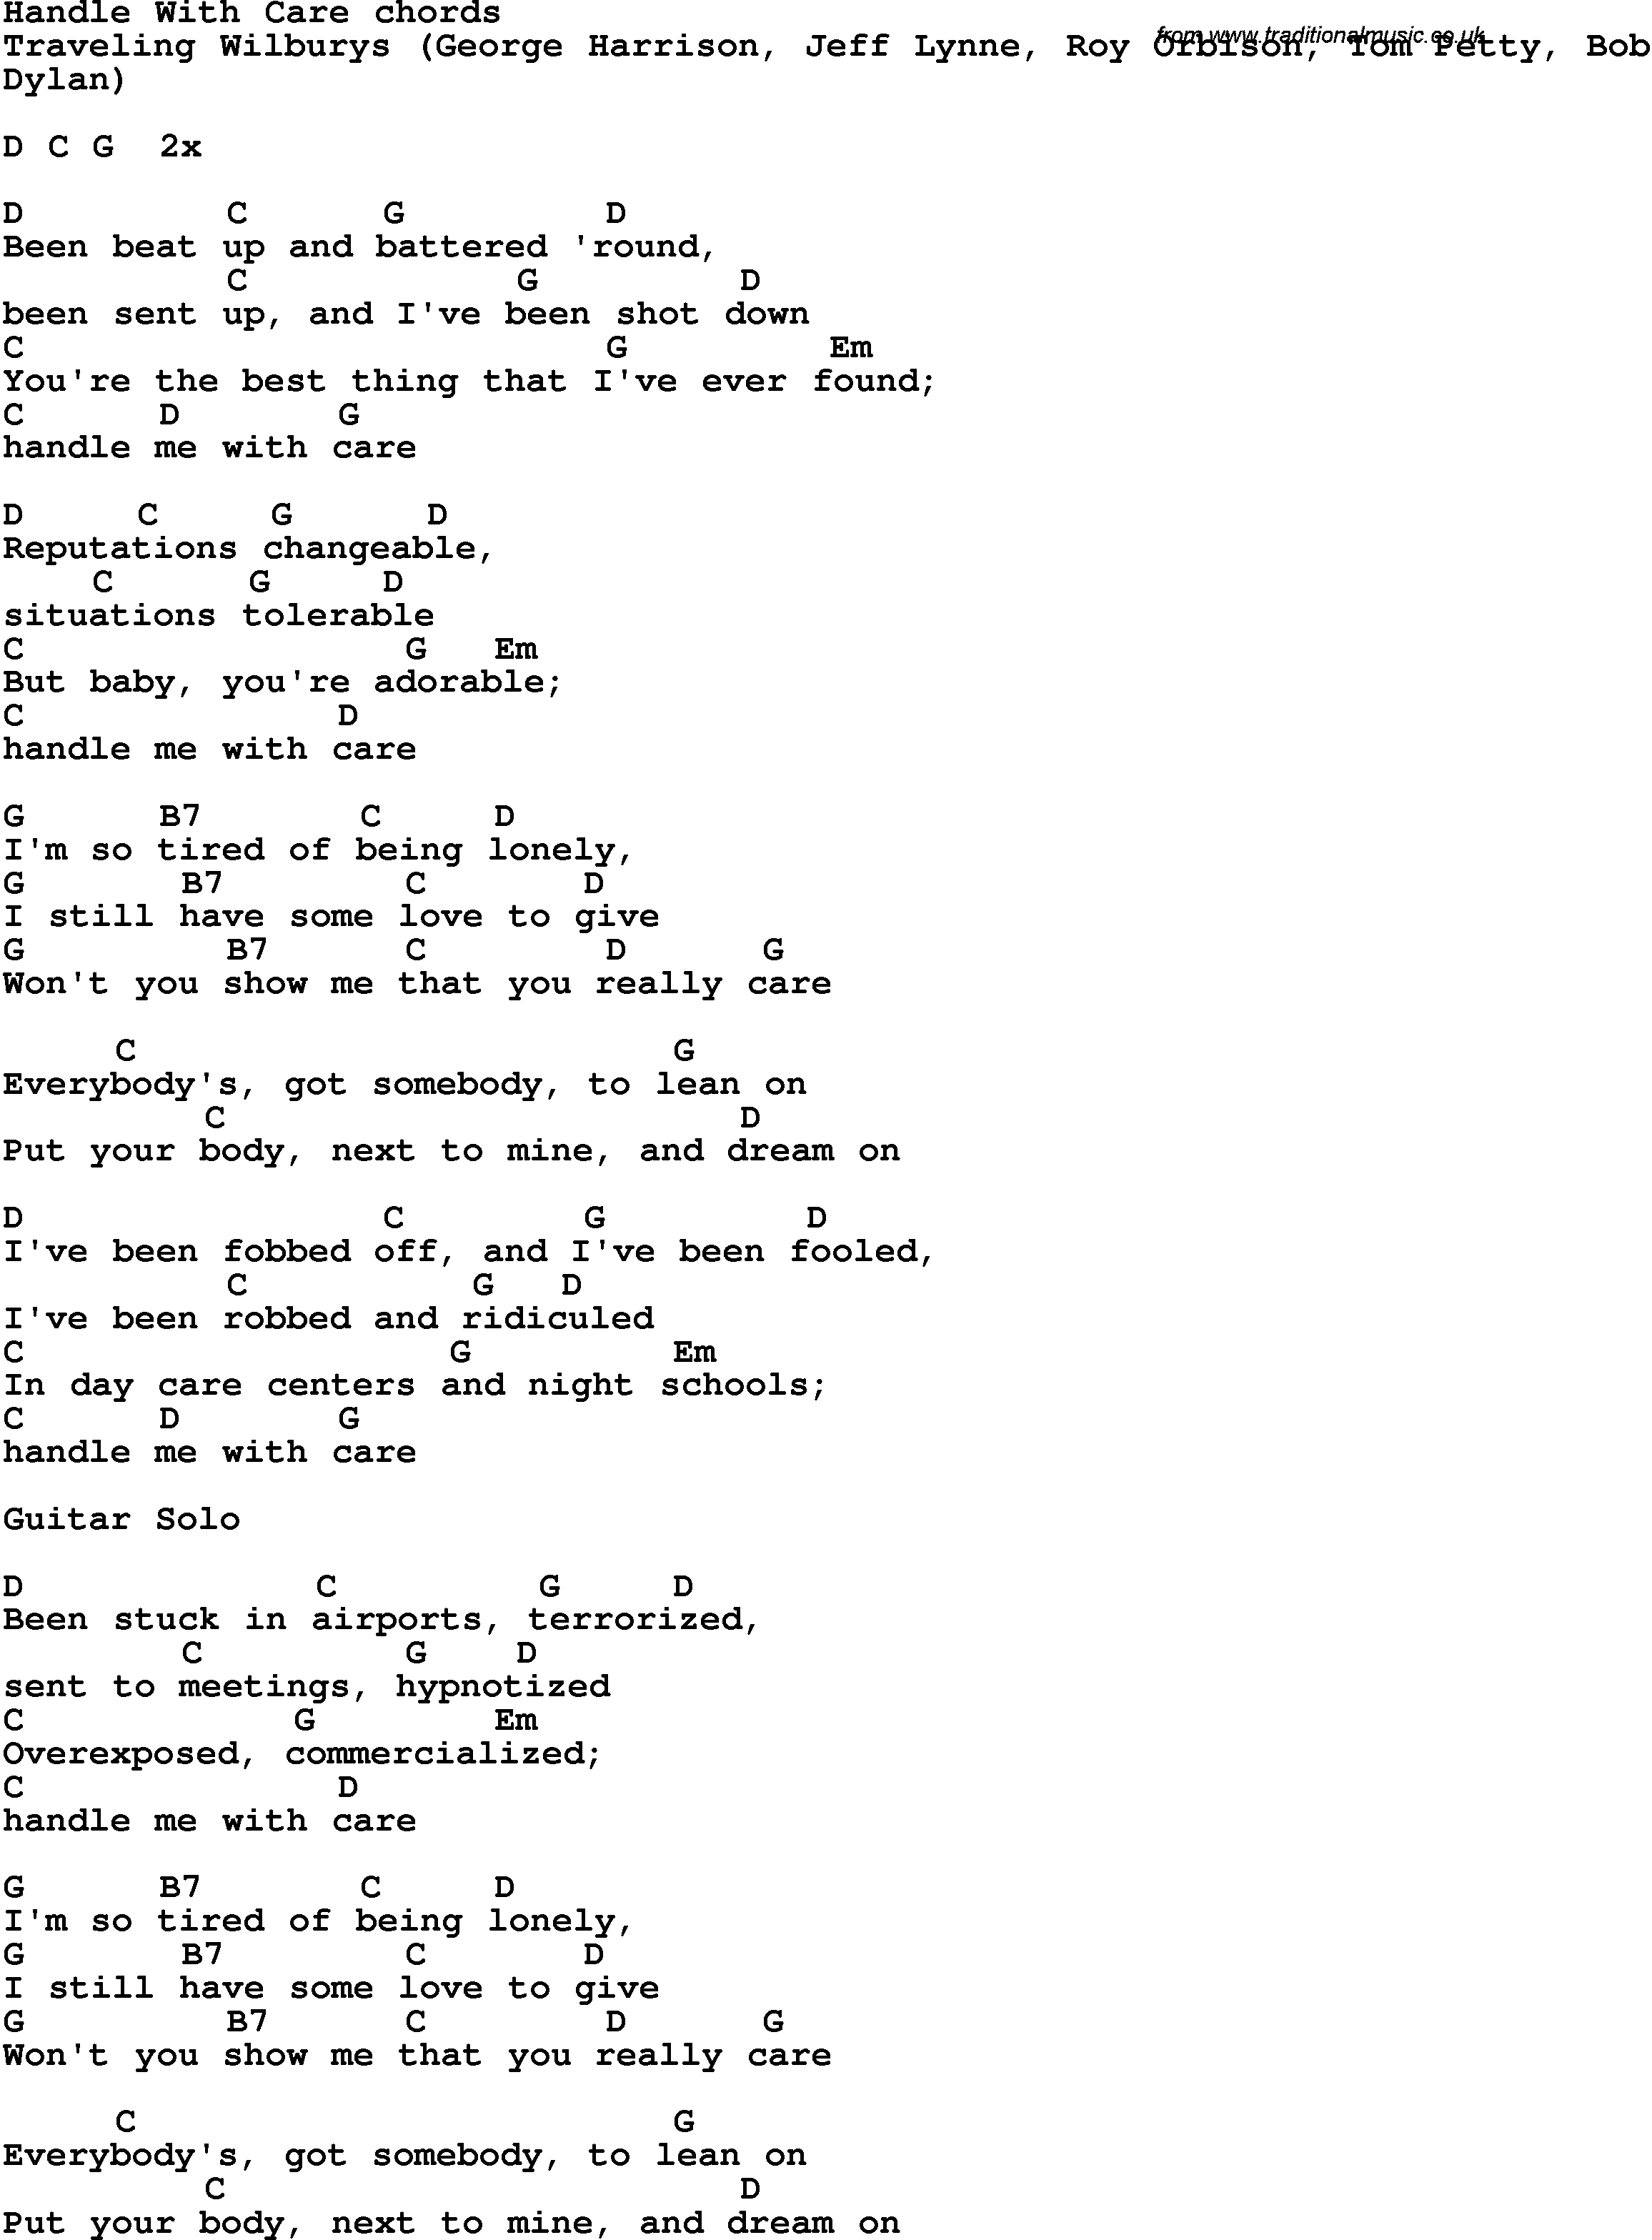 Song Lyrics with guitar chords for Handle With Care